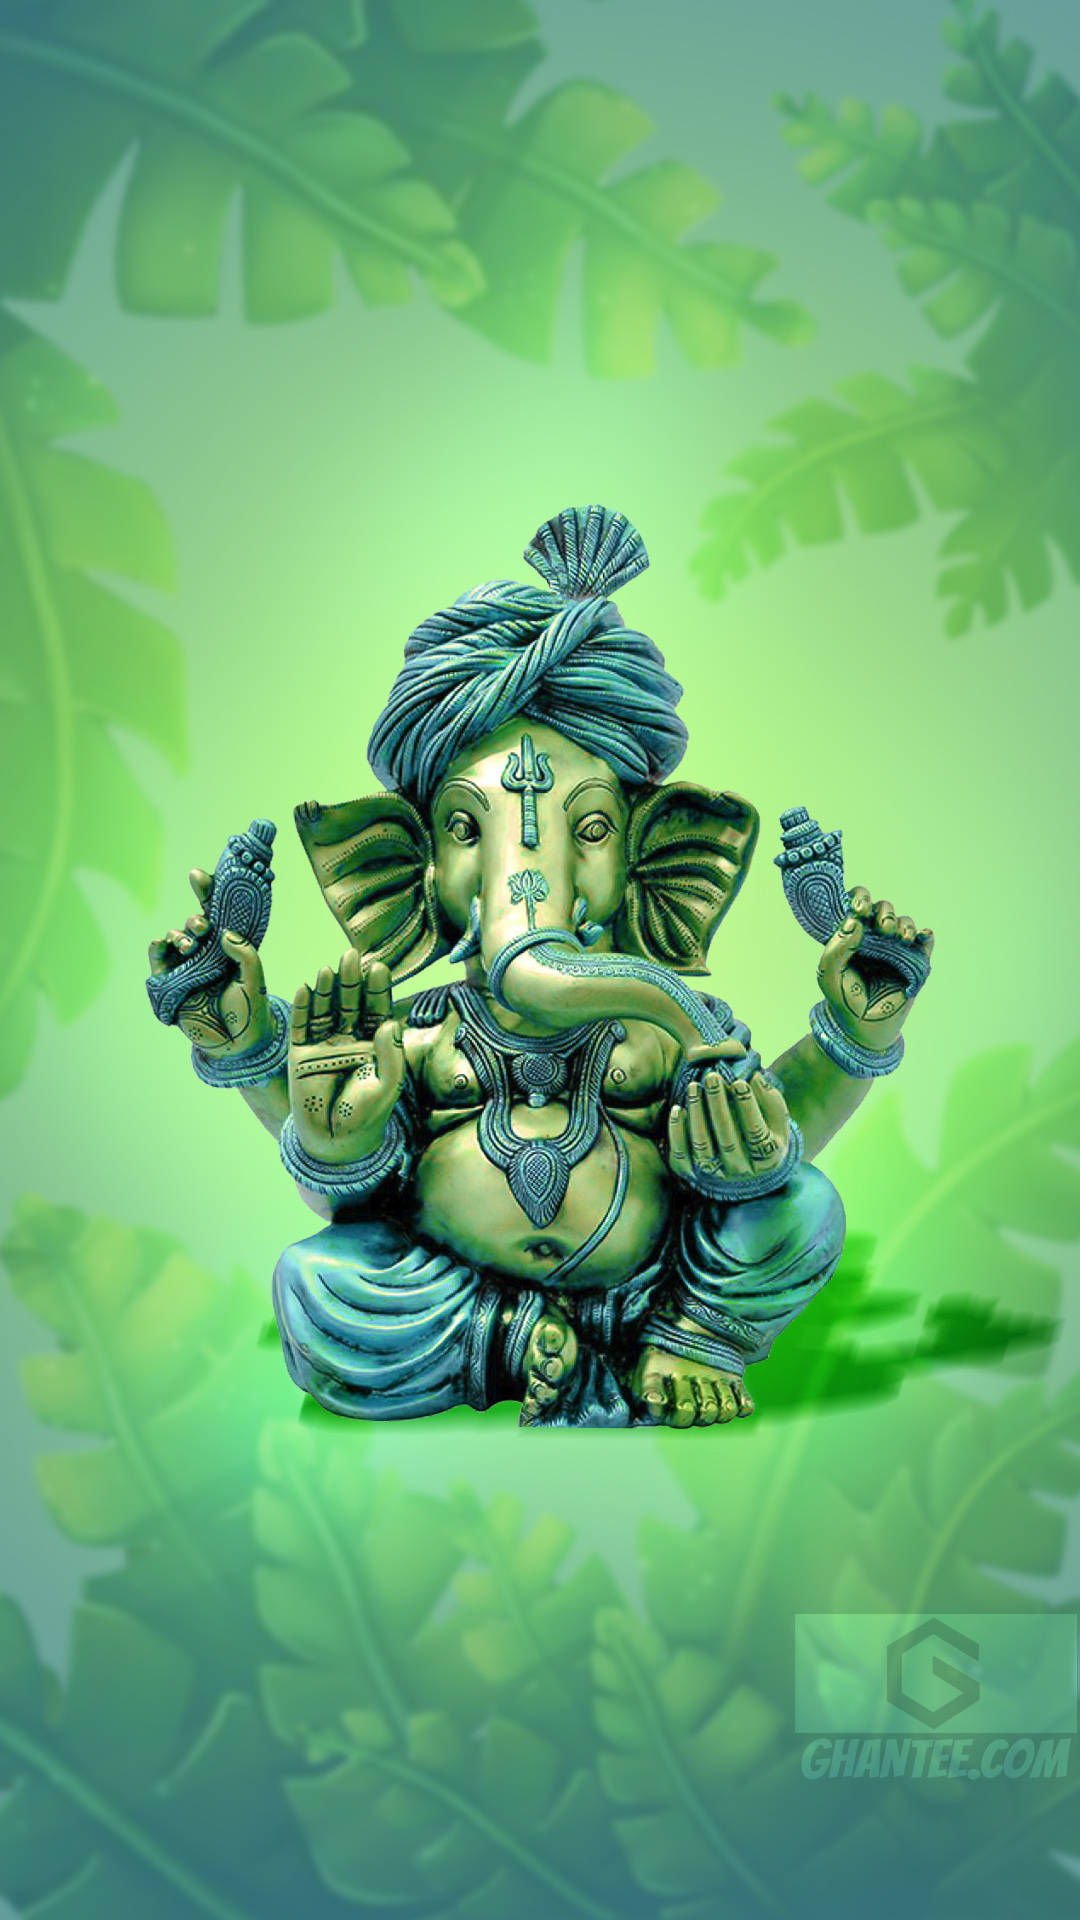 Model No  1117 Ganesh Ji Wallpaper  12x15 size  Photographic Paper   Religious posters in India  Buy art film design movie music nature  and educational paintingswallpapers at Flipkartcom